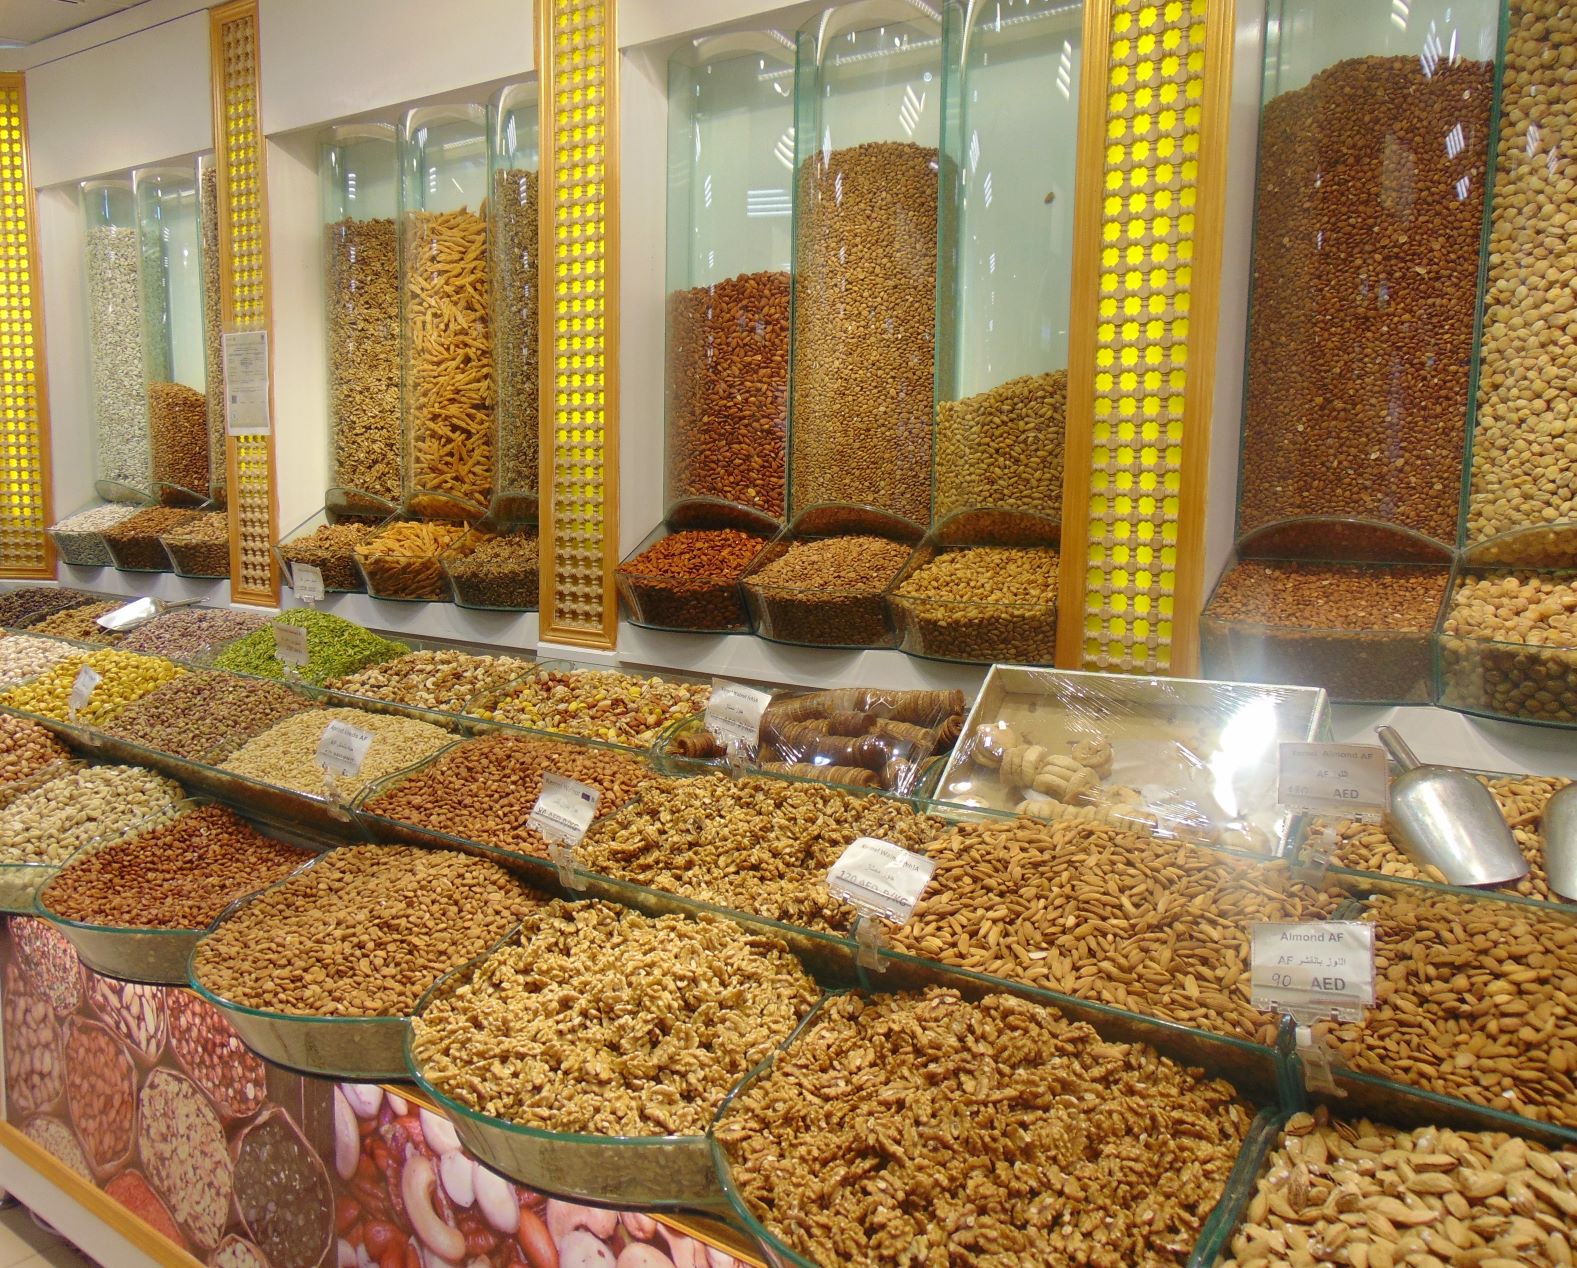 "Melanin....Nut Style"
A display of a variety of nuts for sale.